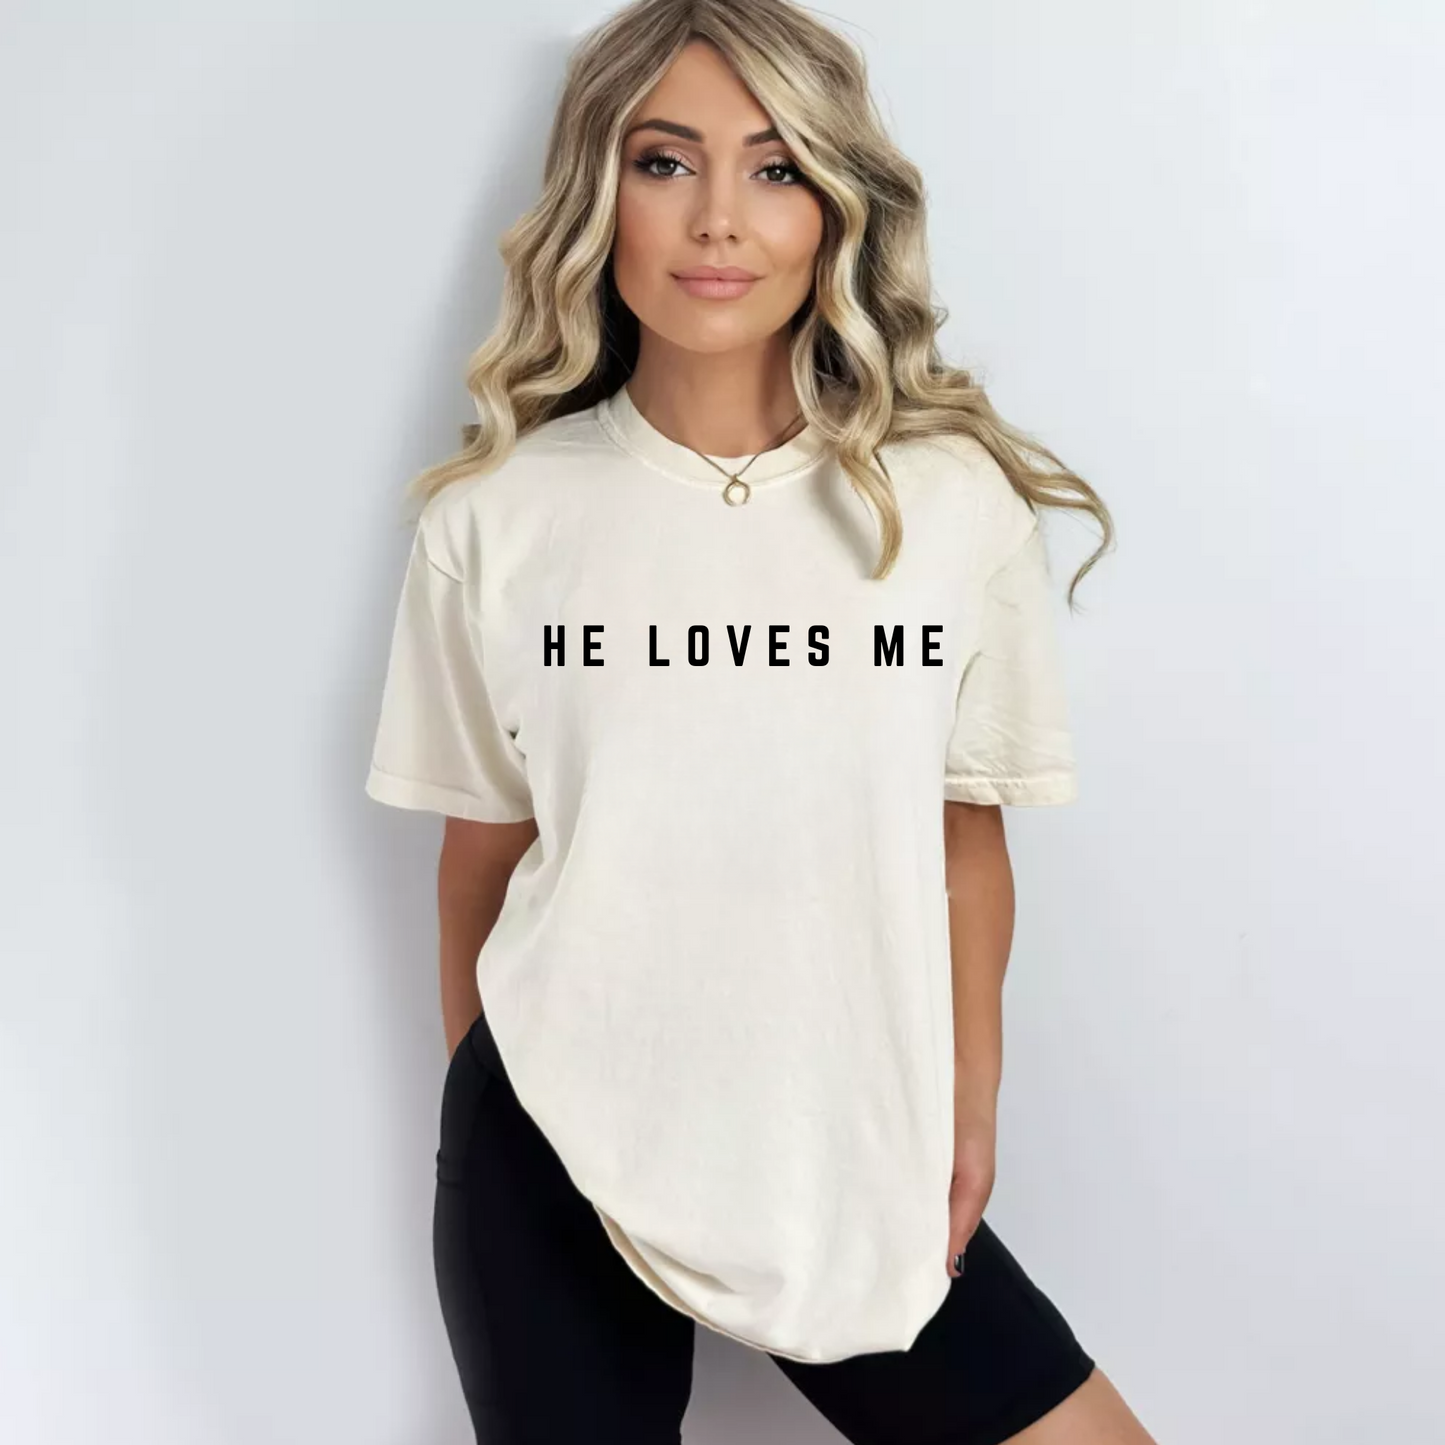 (shirt not included) HE LOVES ME - Matte Clear Film Transfer